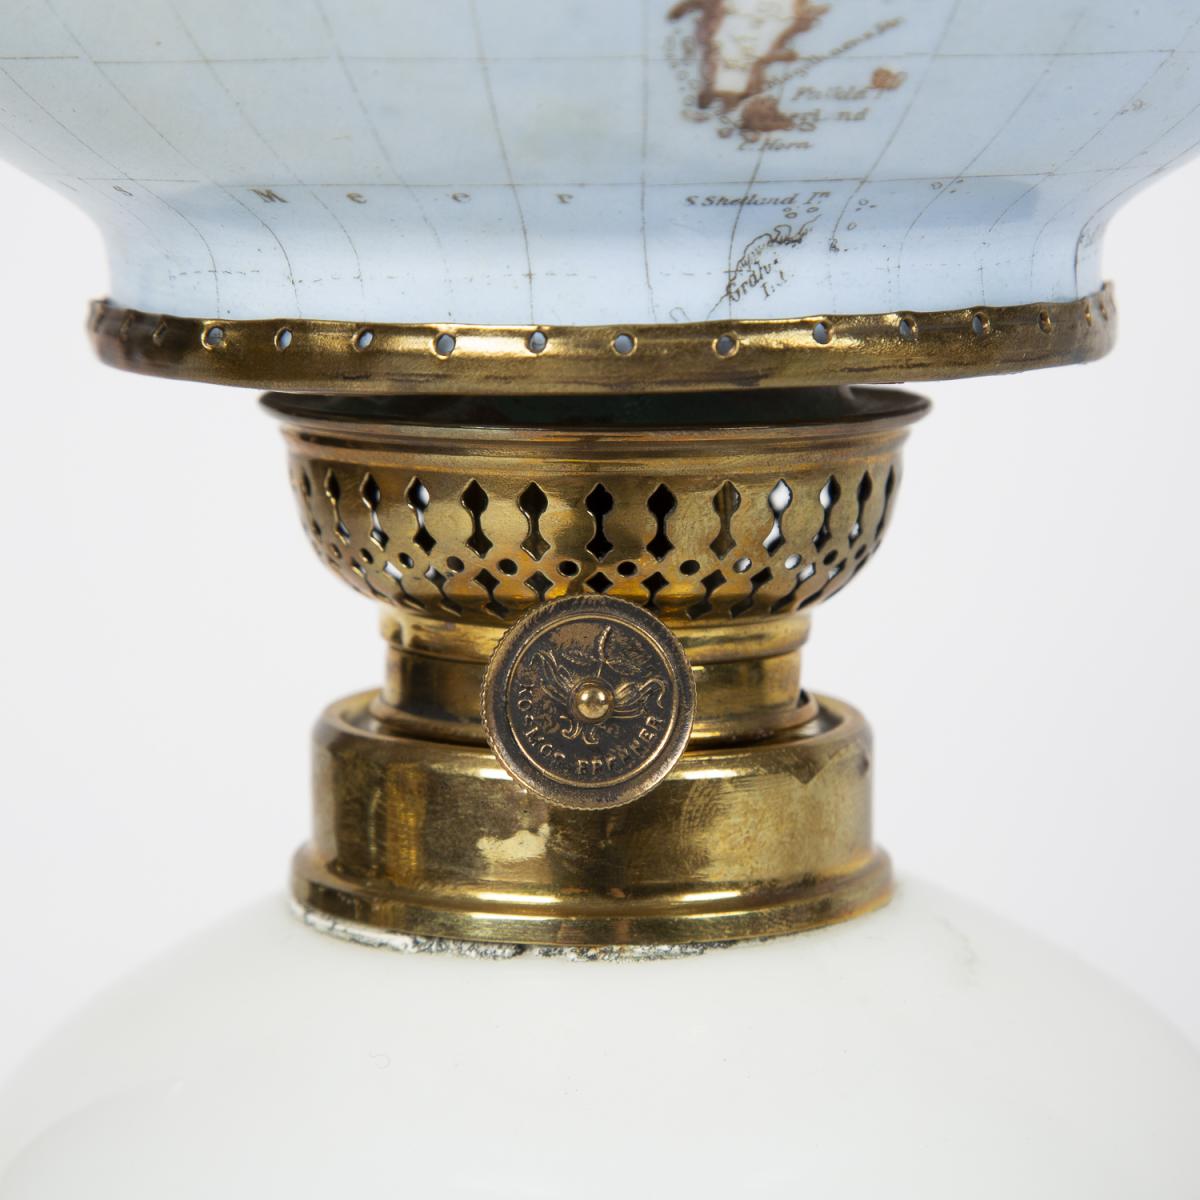 Oil lamp with an illuminating globe shade by Stelzig, Kittel & Co